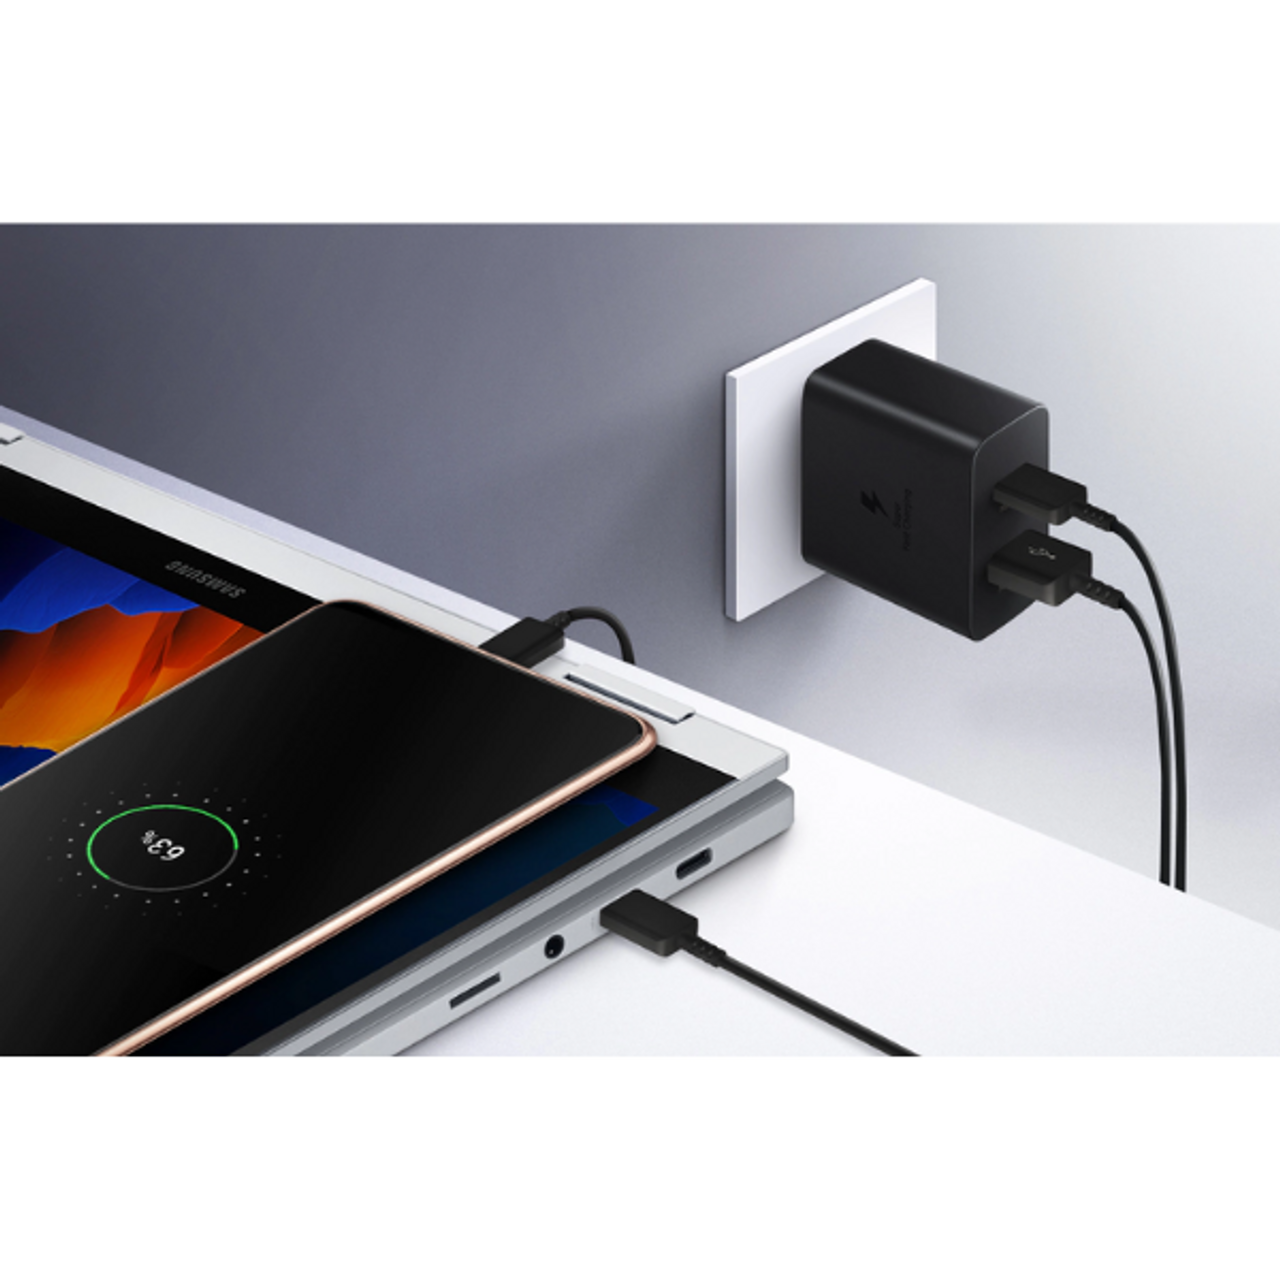 Samsung® 35W Power Adapter Duo product image